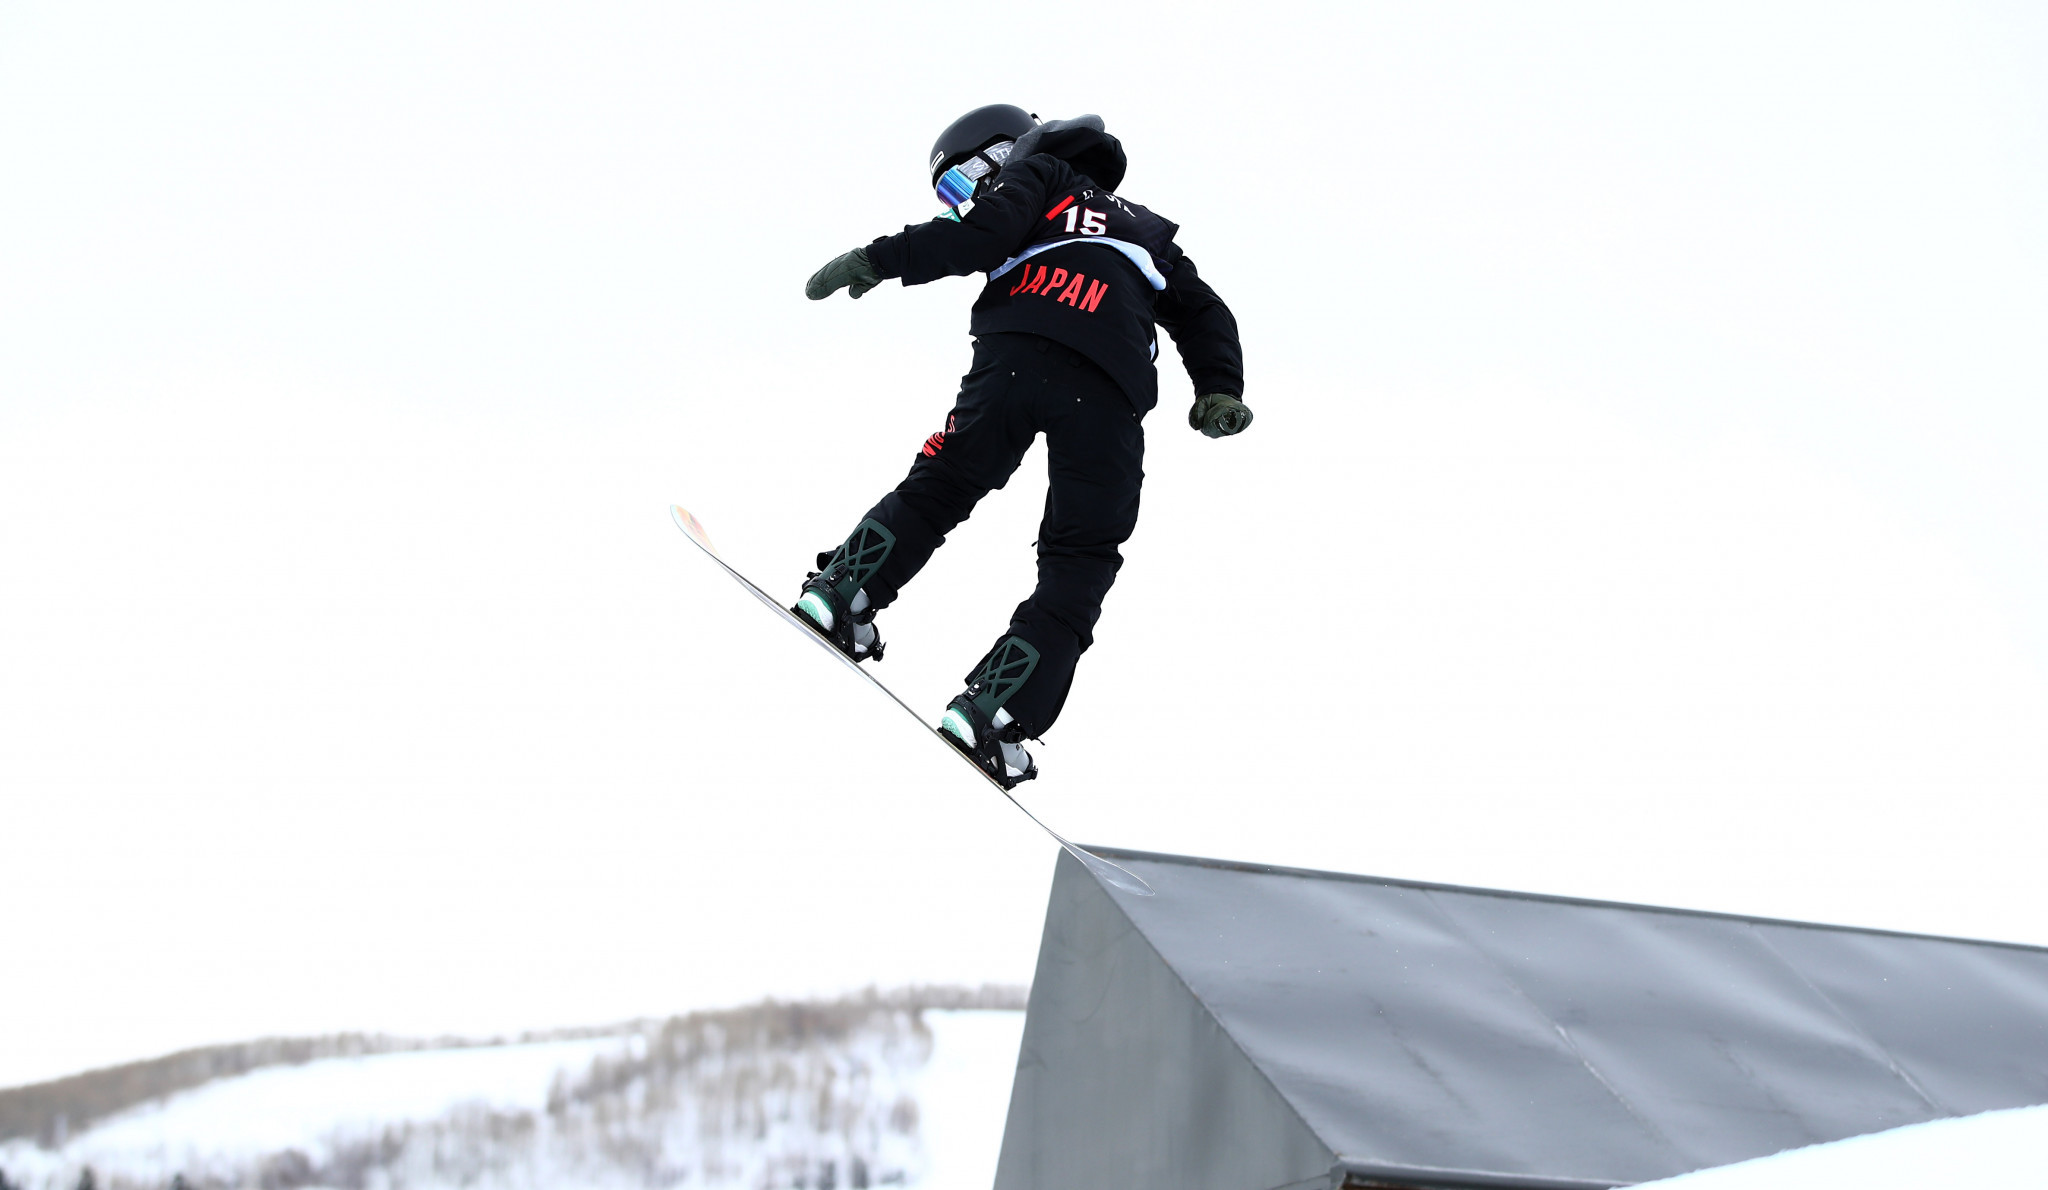 US Open Snowboarding Championships 2021 cancelled due to coronavirus